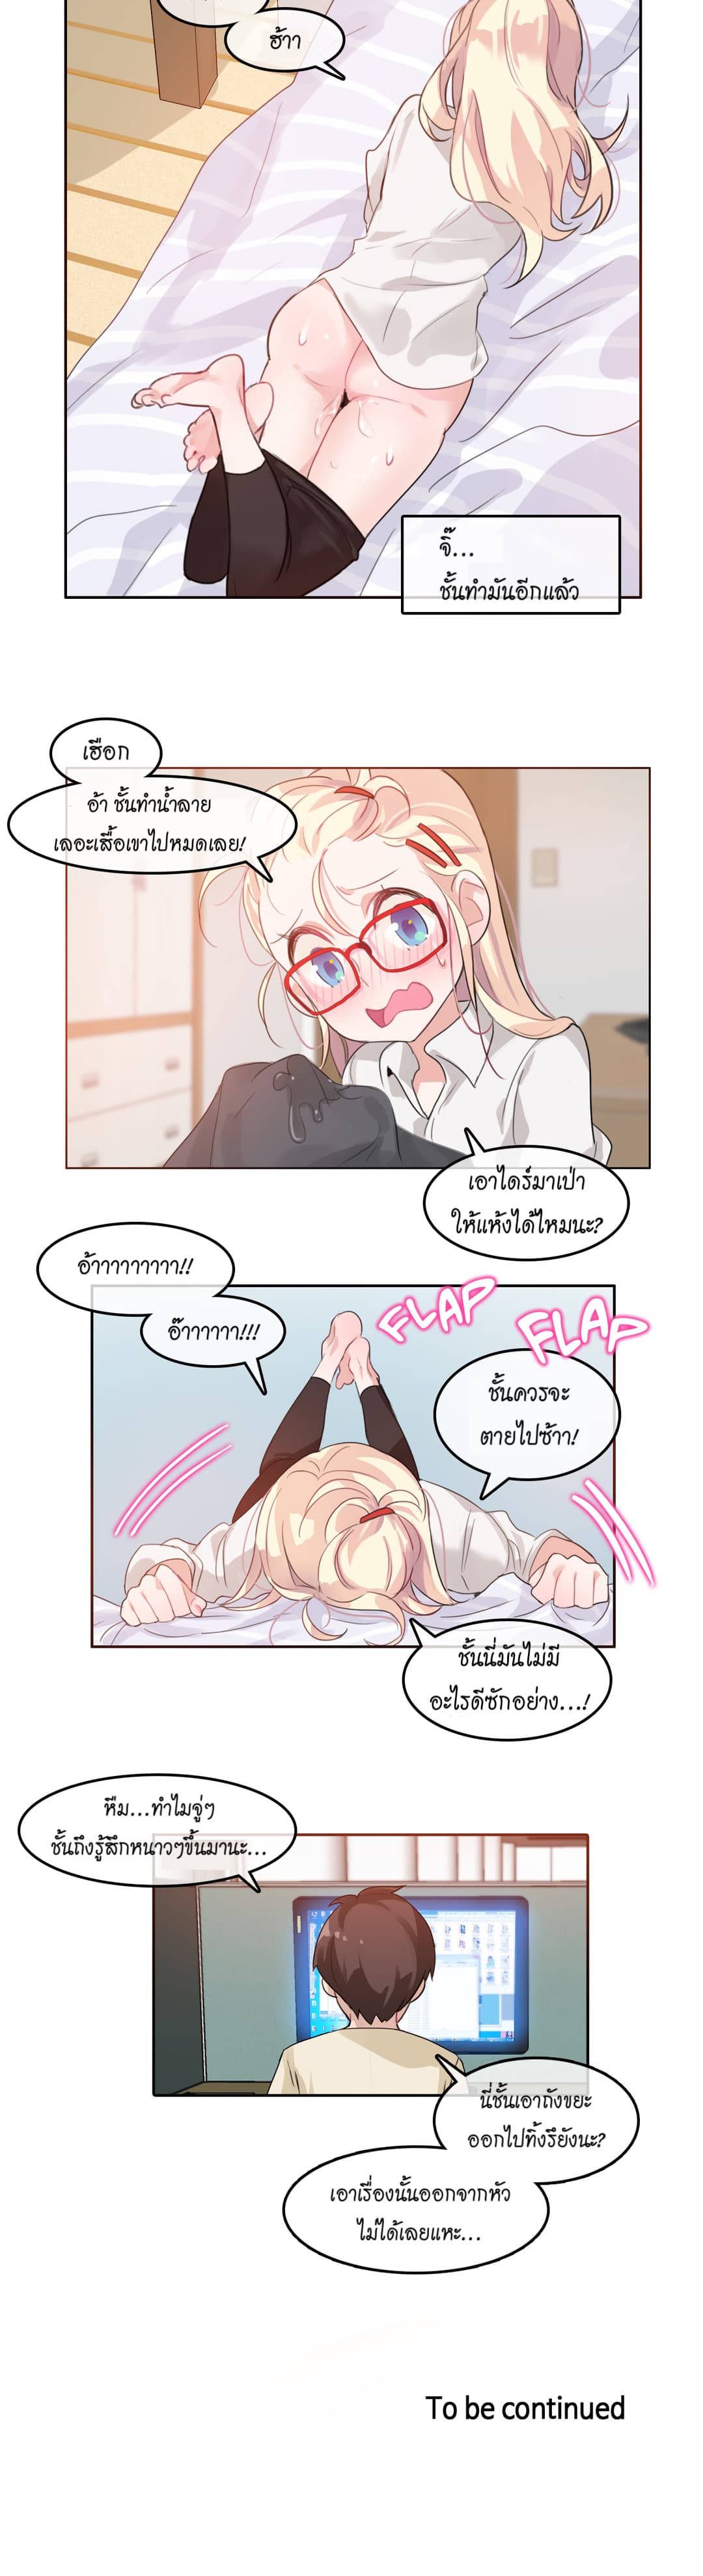 A Pervert’s Daily Life 8 (18)